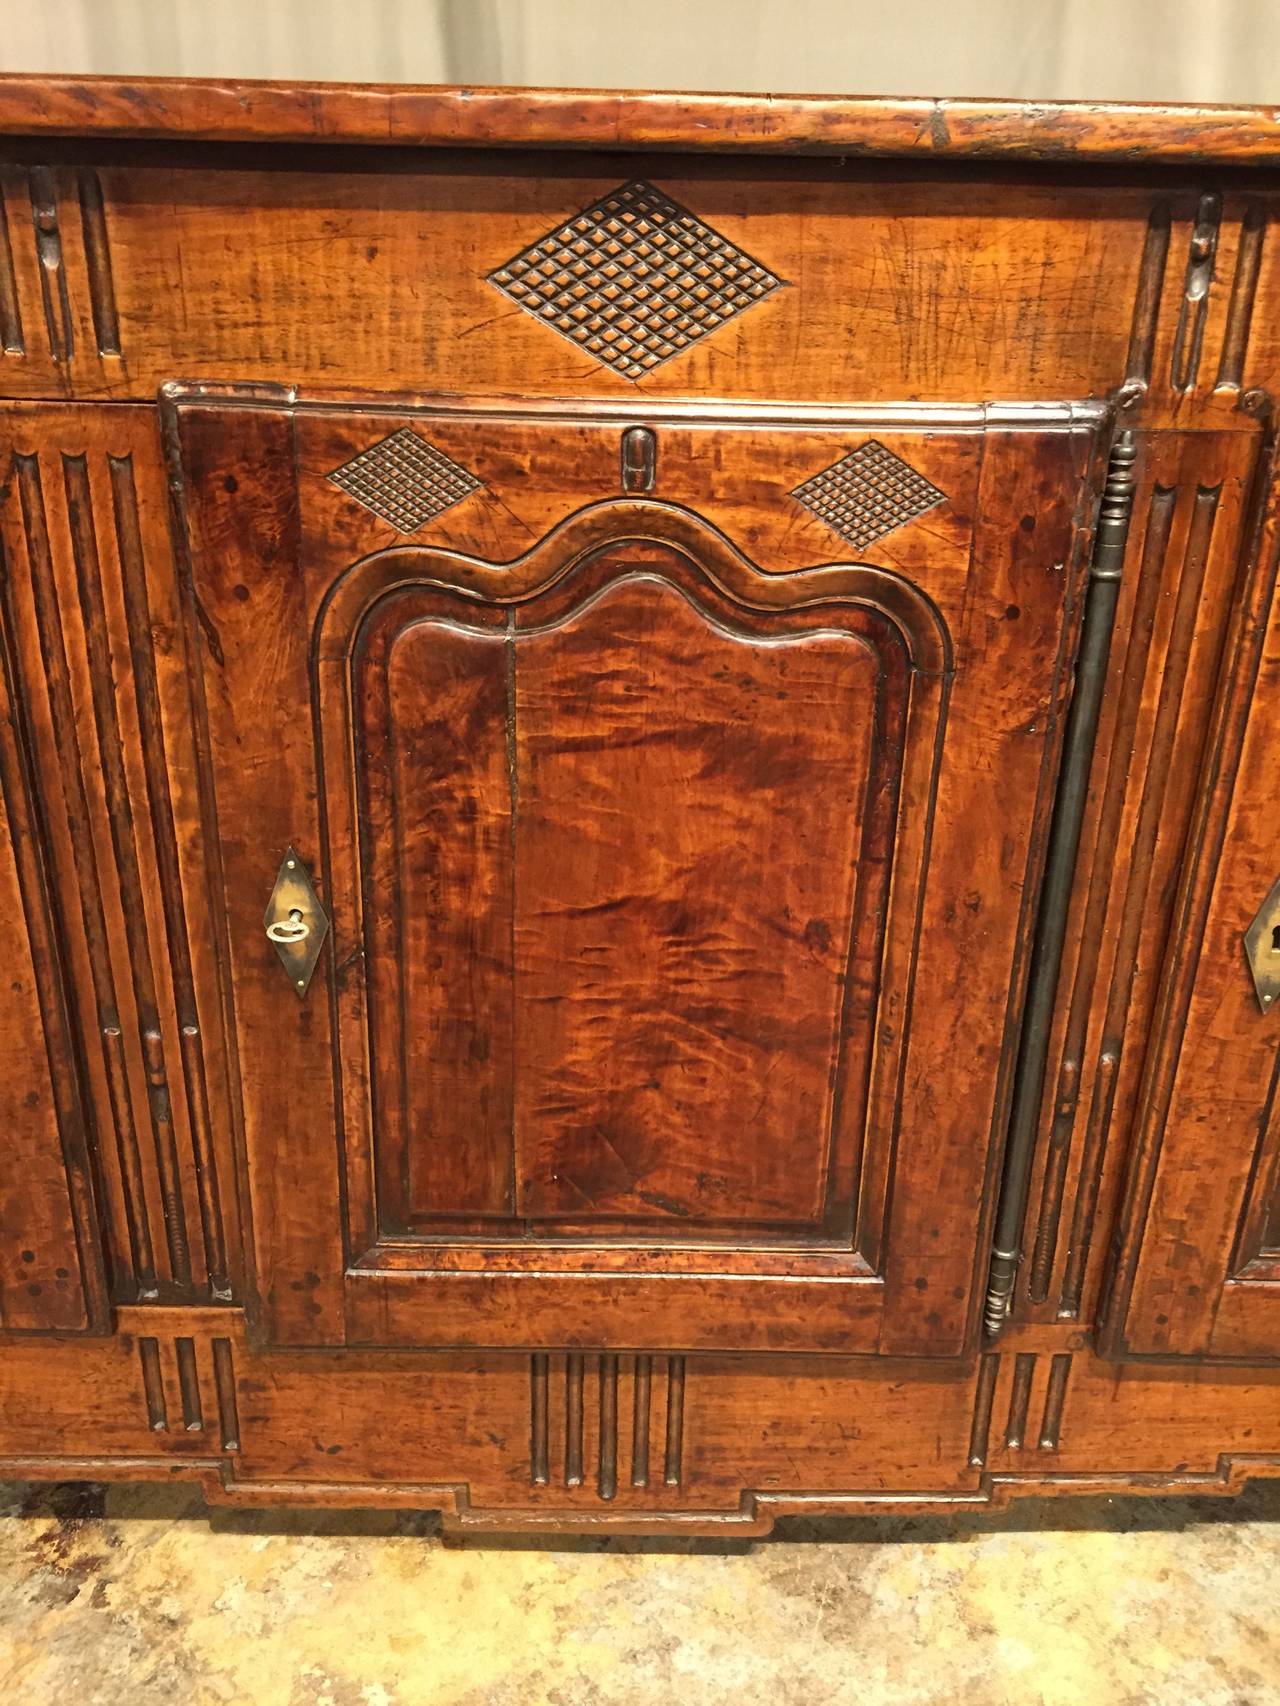 French Provincial transitional Louis XVI Directoire three-door enfilade. Walnut body with chestnut top. Beautiful warm patina that has been carefully restored.